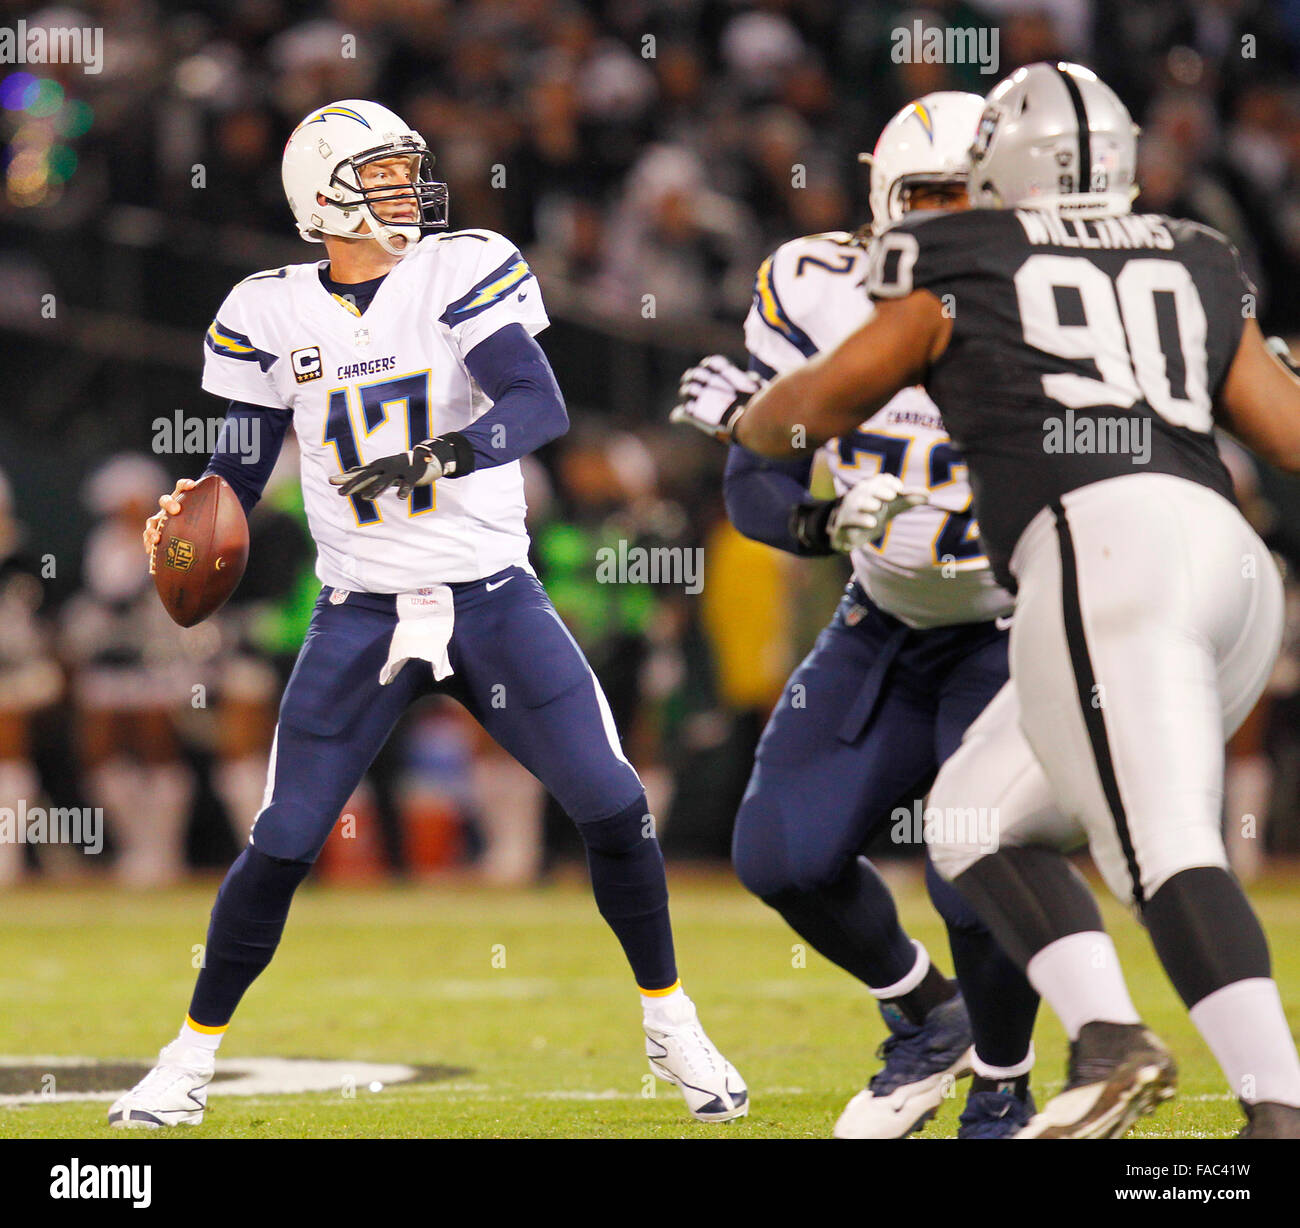 24.12.2015. Oakland, CA, USA - The San Diego Chargers' Philip Rivers (17) throws in the first half against the Oakland Raiders at Oakland Colliseum in Oakland, Calif., on Thursday, Dec. 24, 2015 Stock Photo